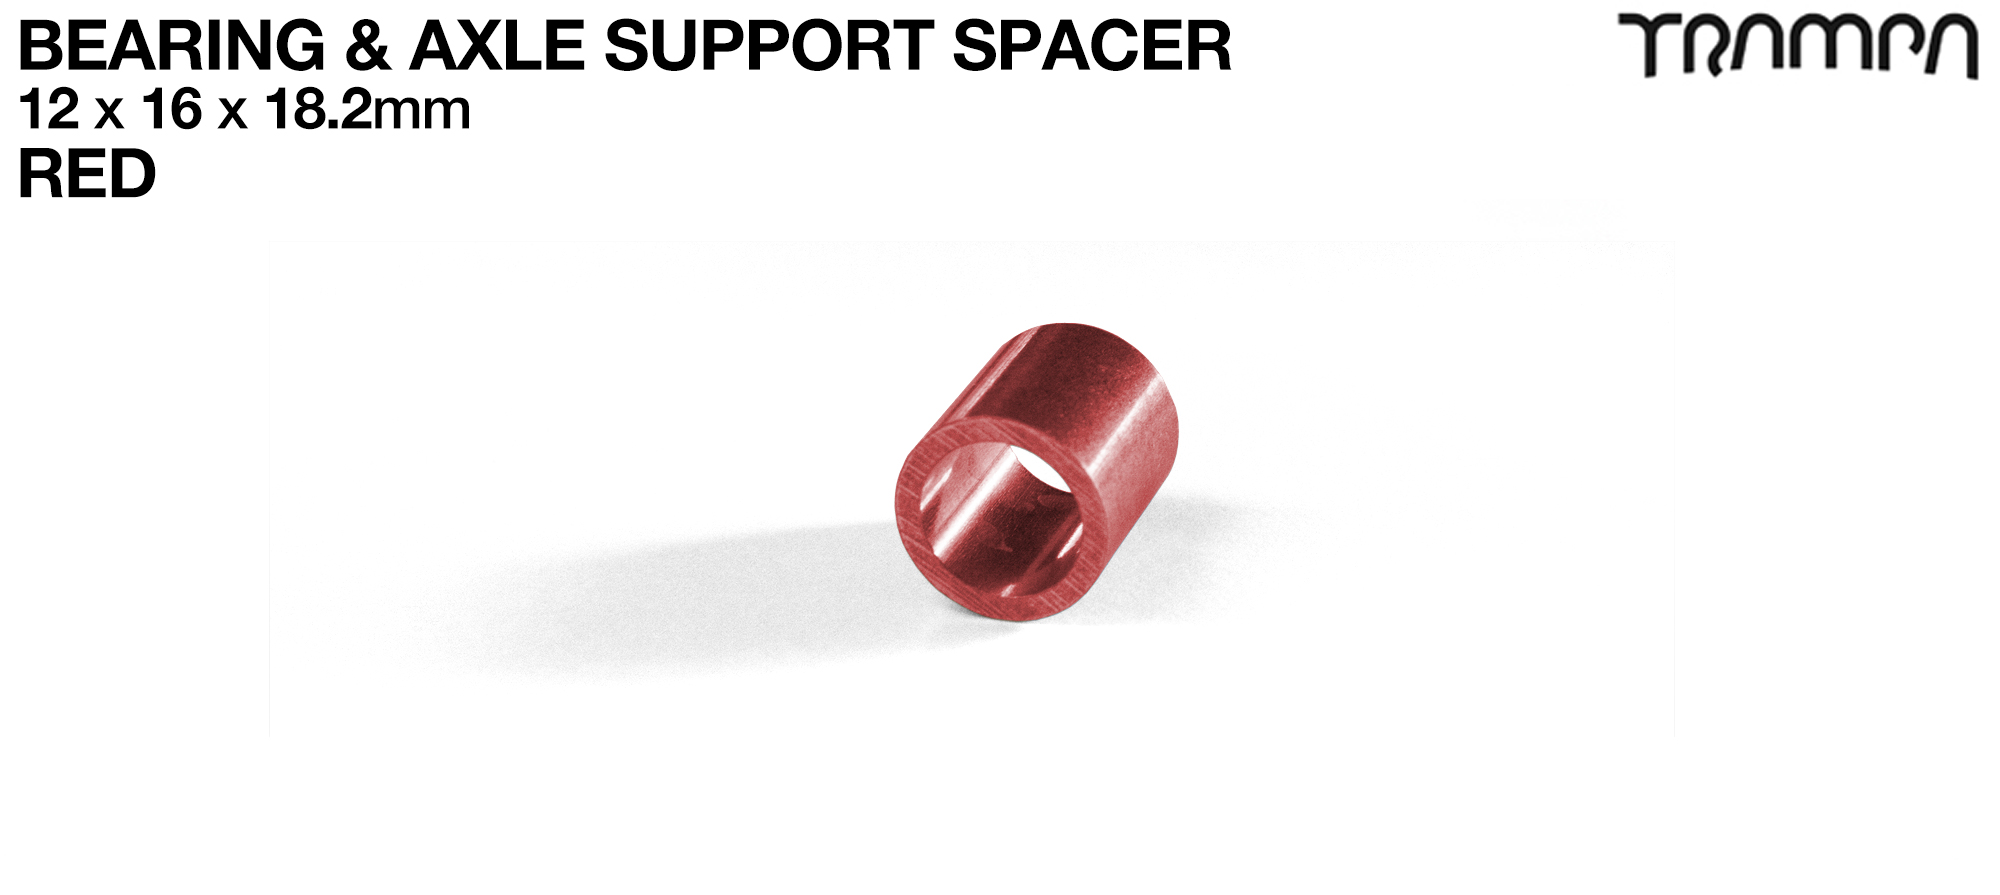 RED 18.2mm Wheel Support Axle Spacers 